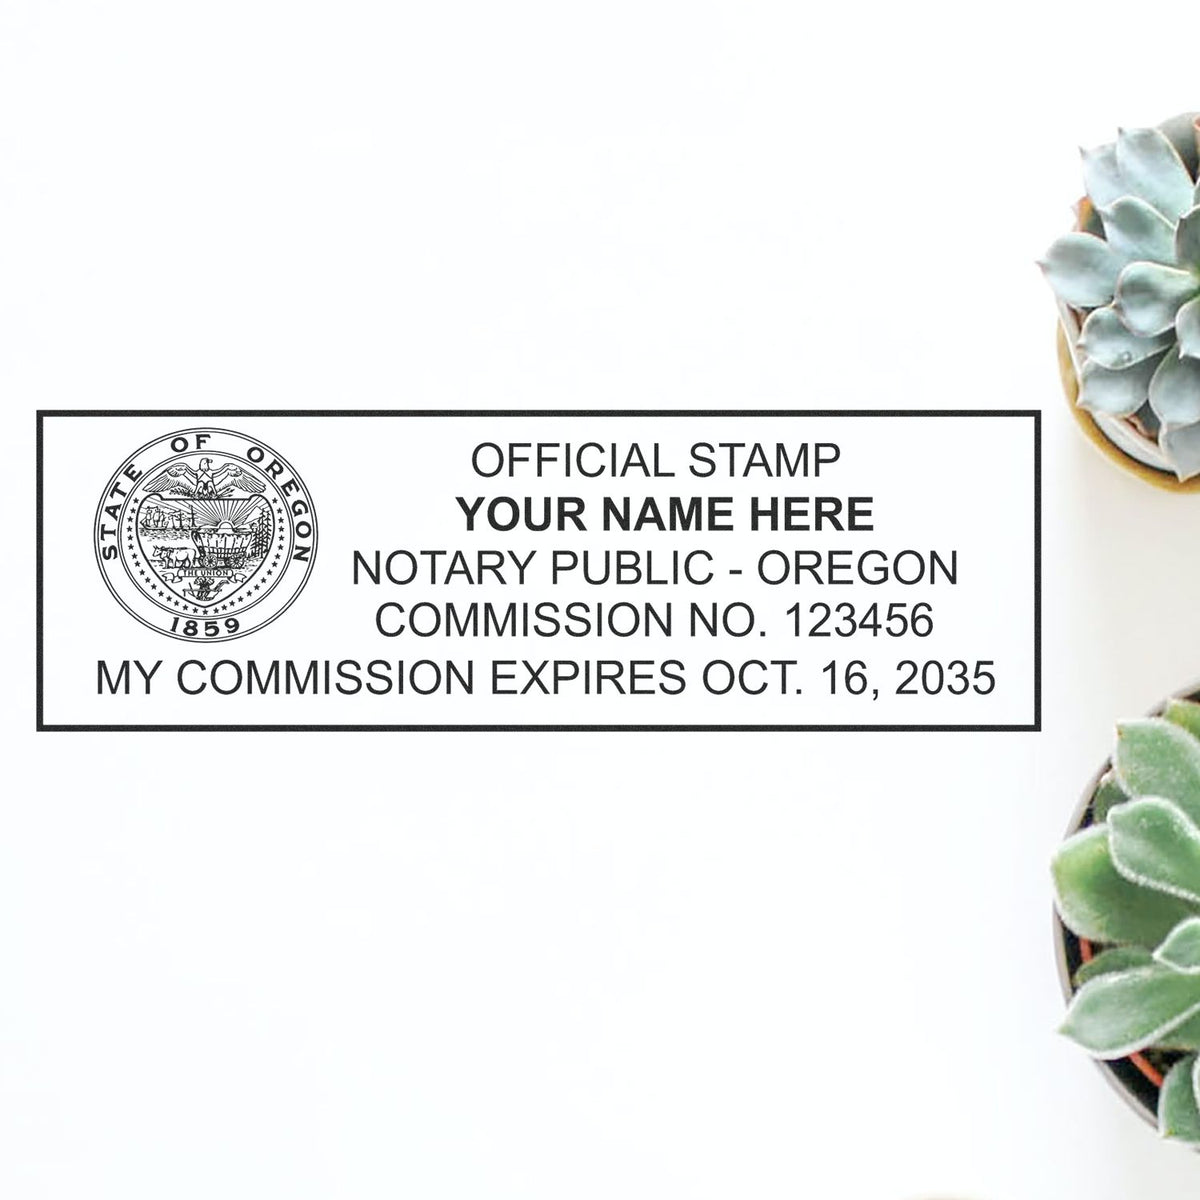 The Self-Inking Rectangular Oregon Notary Stamp stamp impression comes to life with a crisp, detailed photo on paper - showcasing true professional quality.